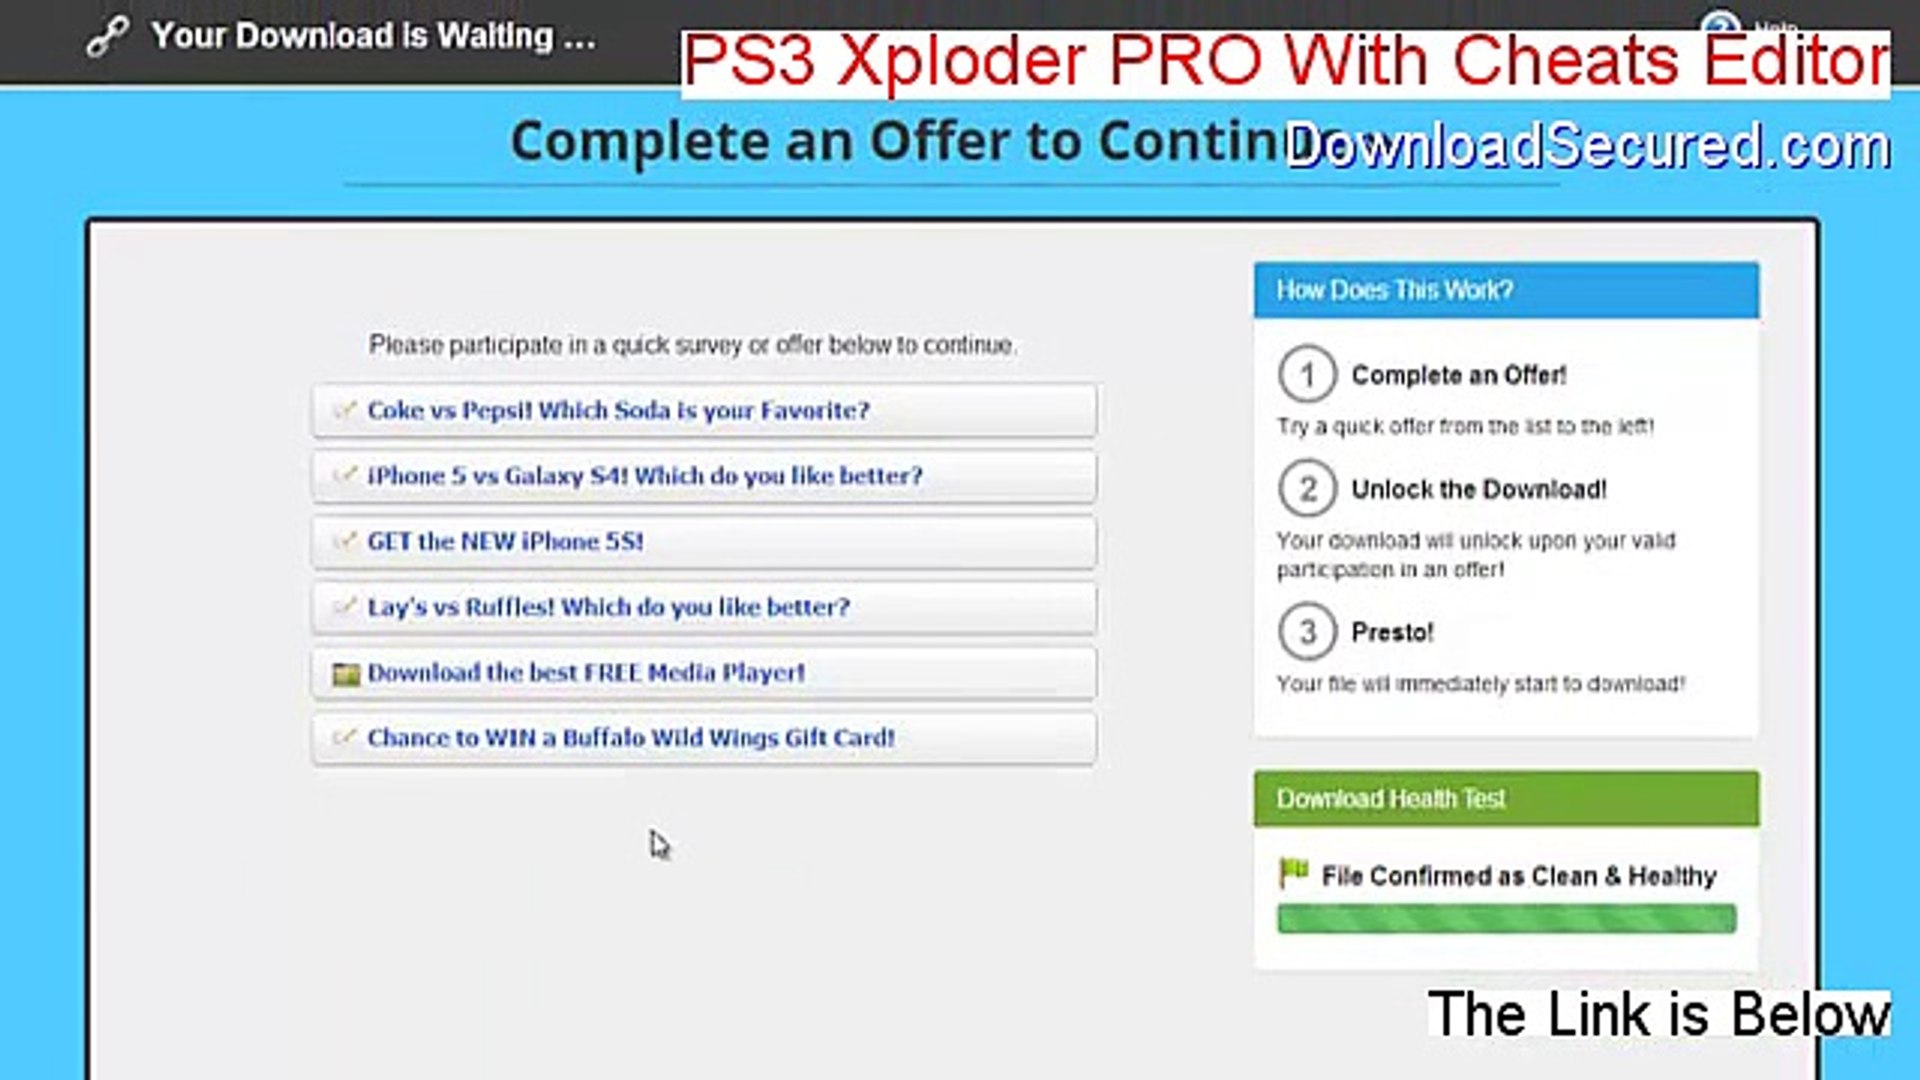 PS3 Xploder PRO With Cheats Editor Cracked (Free of Risk Download) - video  Dailymotion